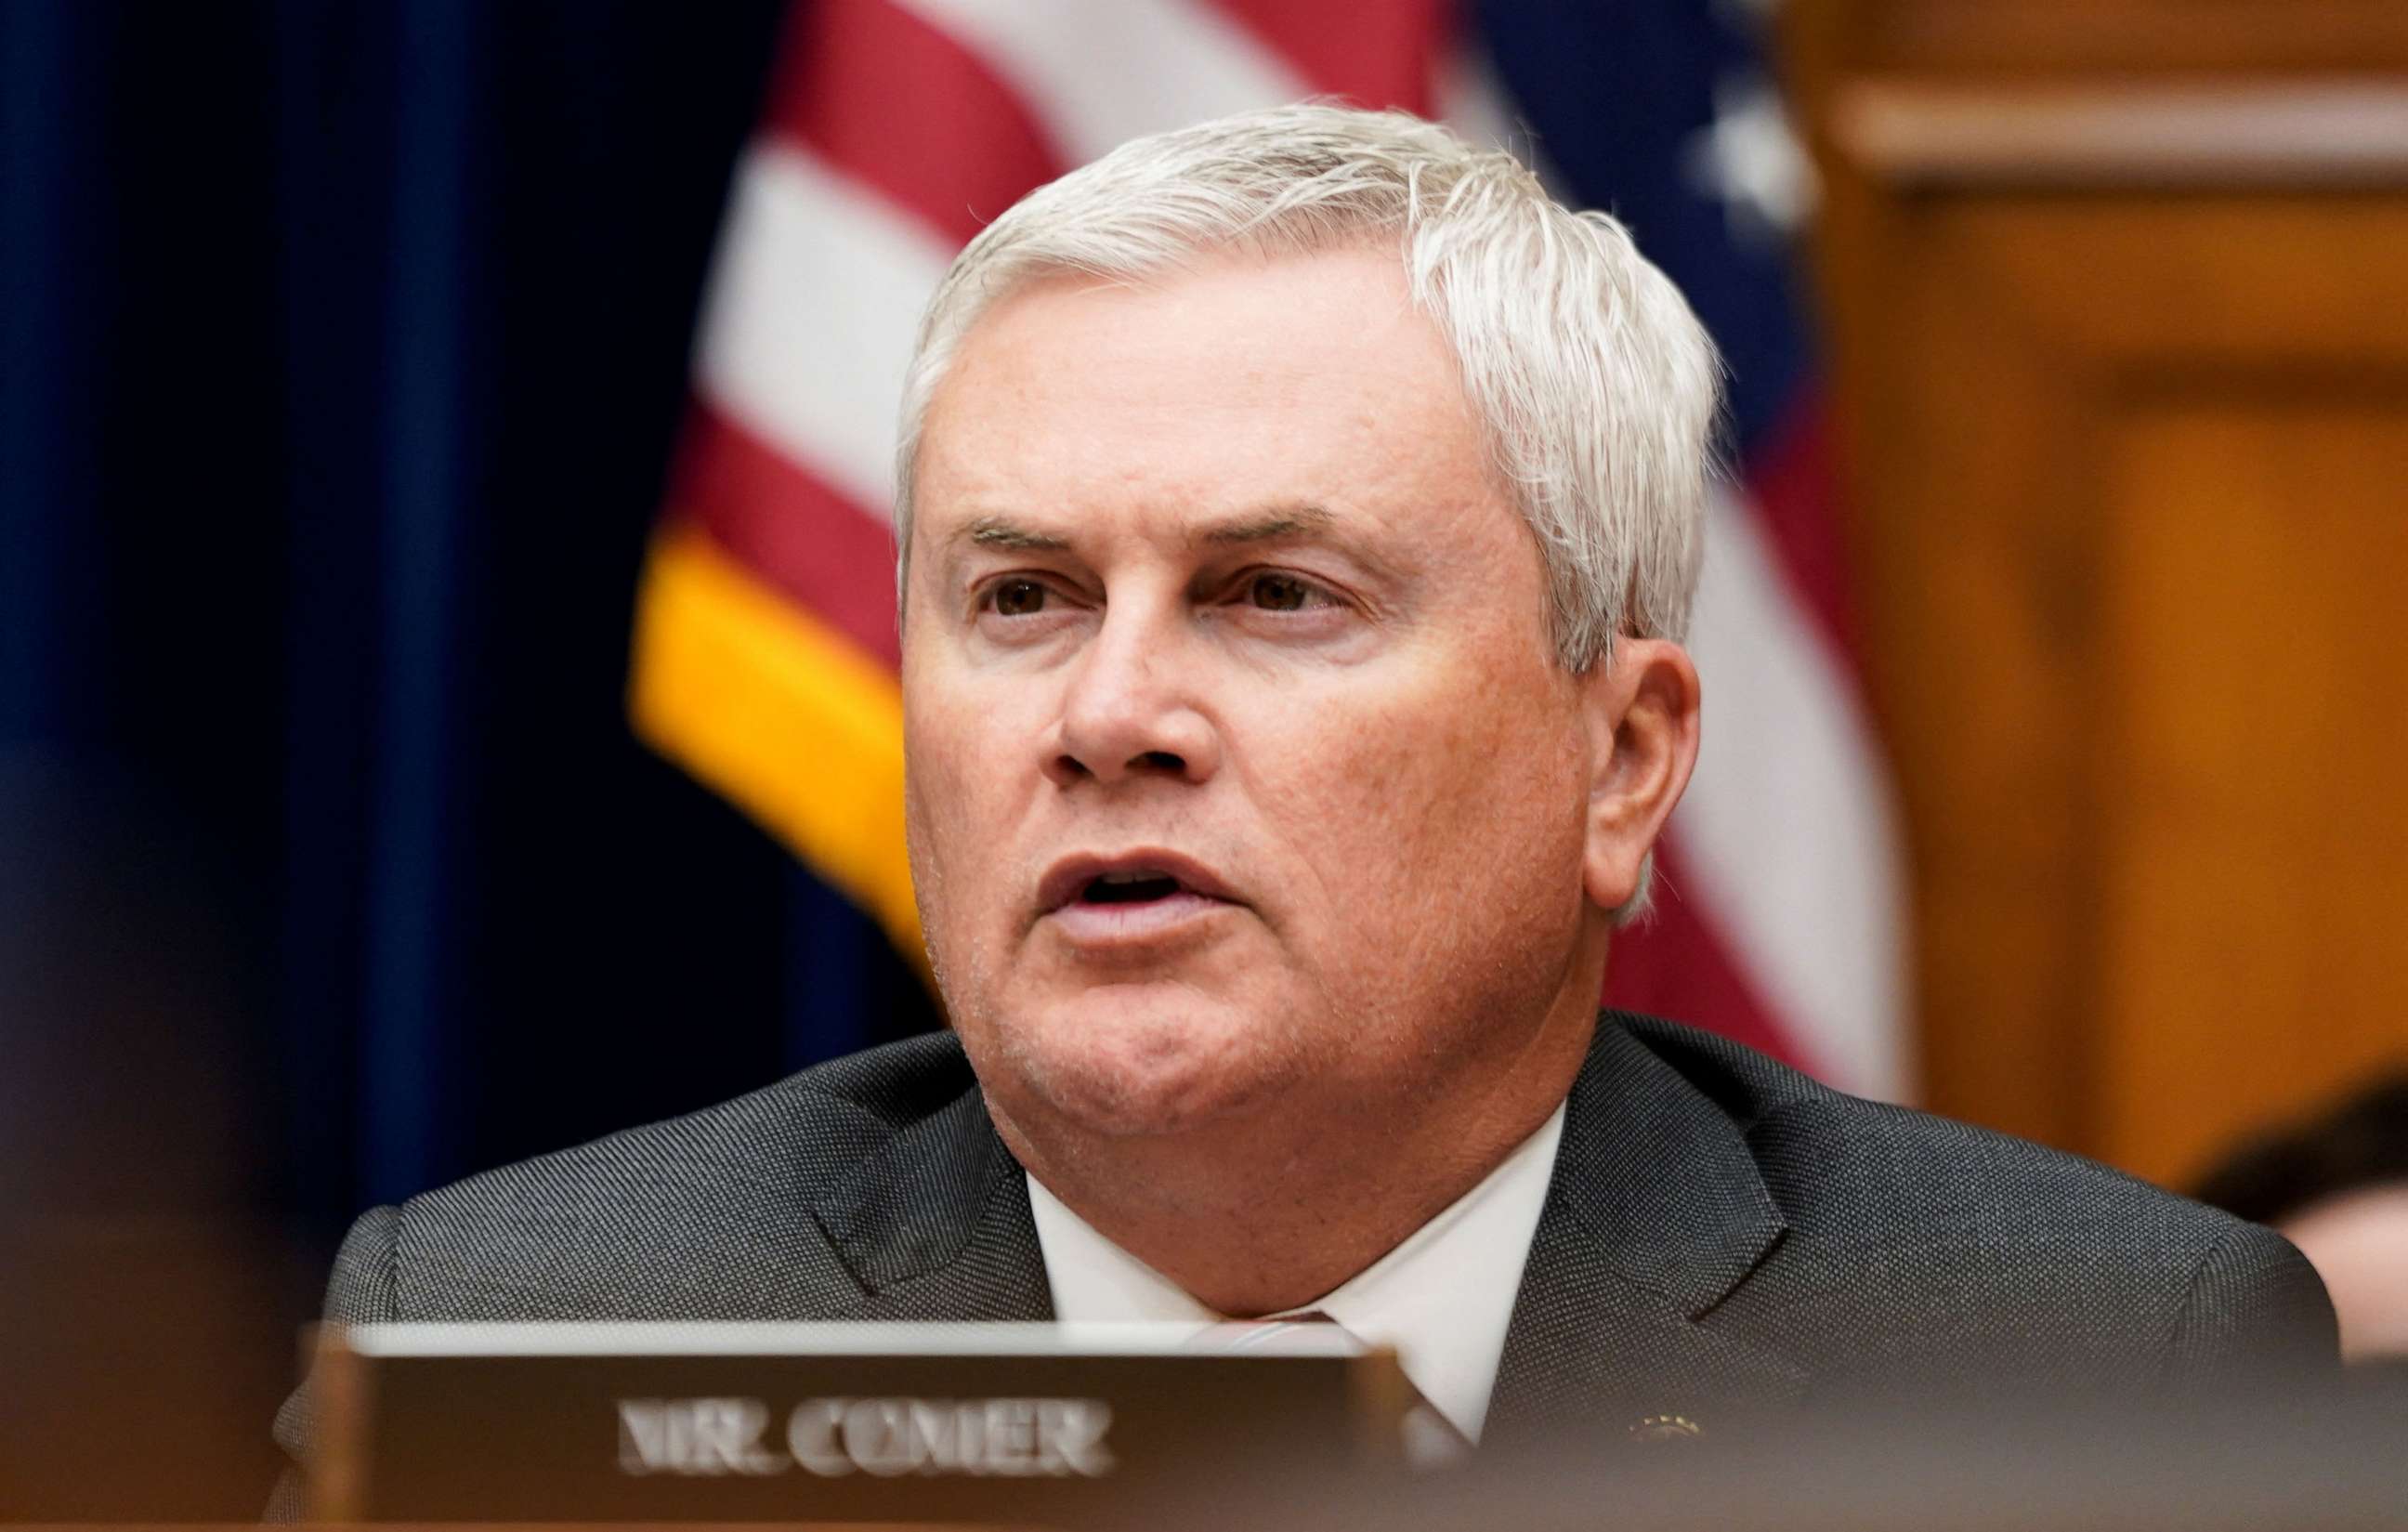 PHOTO: Rep. James Comer attends a hearing of the House Select Subcommittee on the Coronavirus Pandemic about the effect of the coronavirus disease (COVID-19) pandemic on students and schools, April 26, 2023.